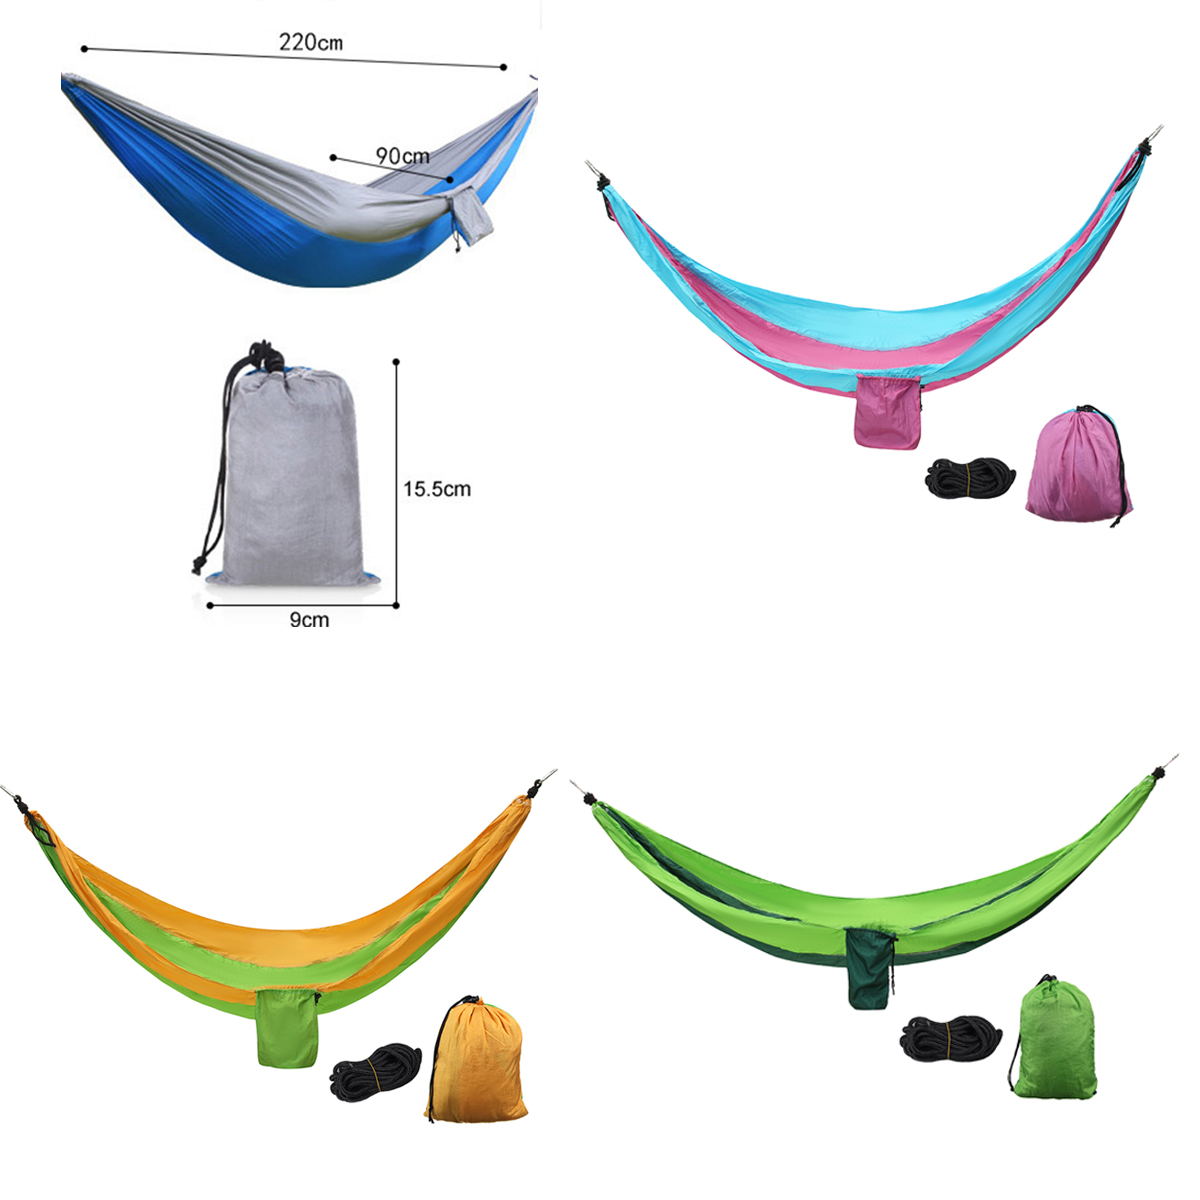 Single-People-Hanging-Swing-Bed-Camping-Hammock-Outdoor-Garden-Travel-with-Storage-Bag-Carabiner-Max-1732038-2